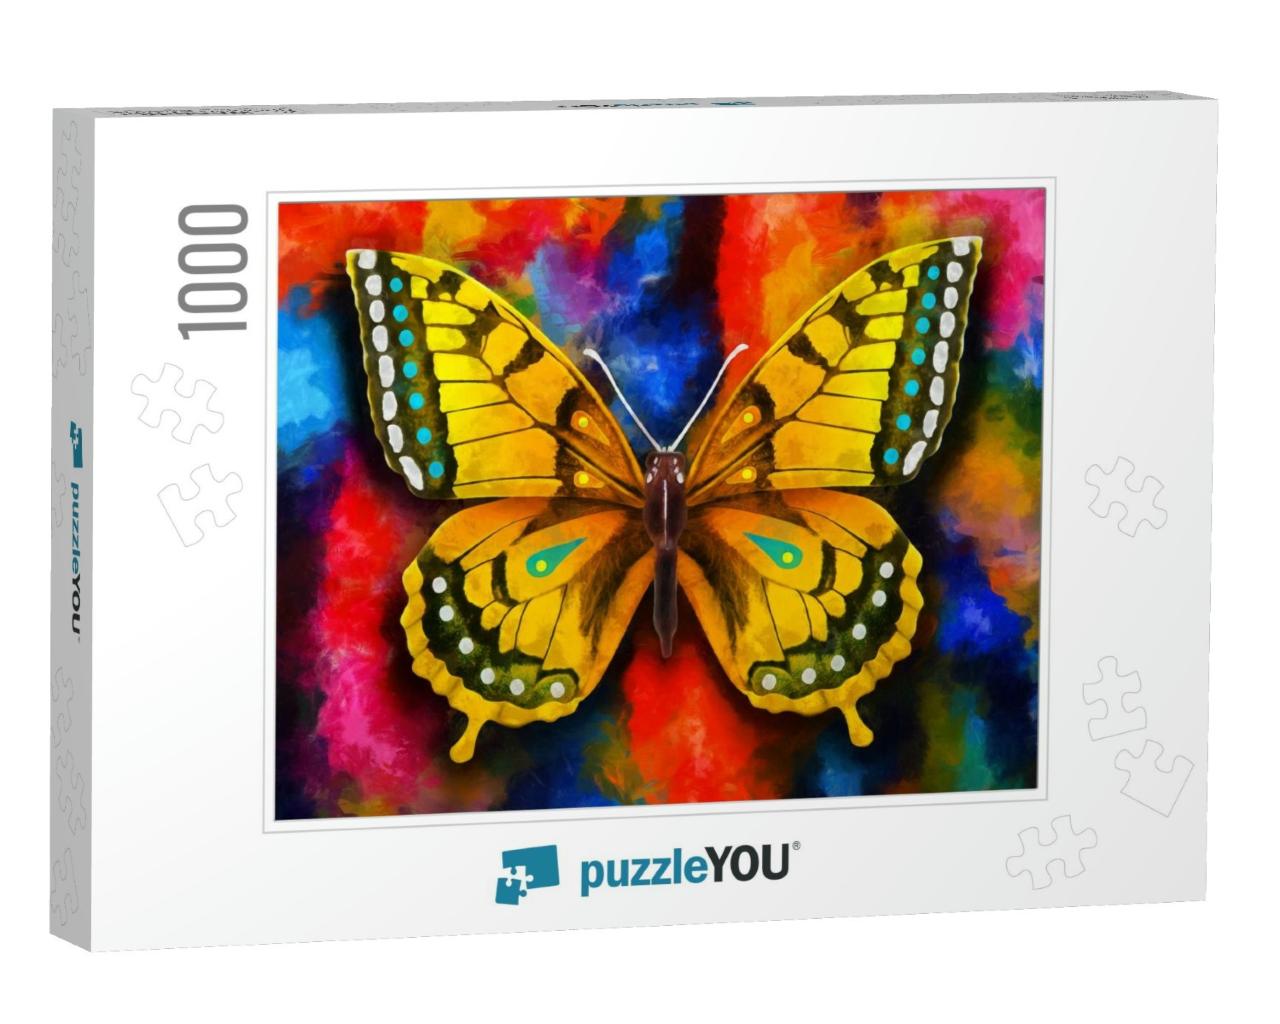 Modern Colorful Butterfly Oil Painting. Abstract Painting... Jigsaw Puzzle with 1000 pieces